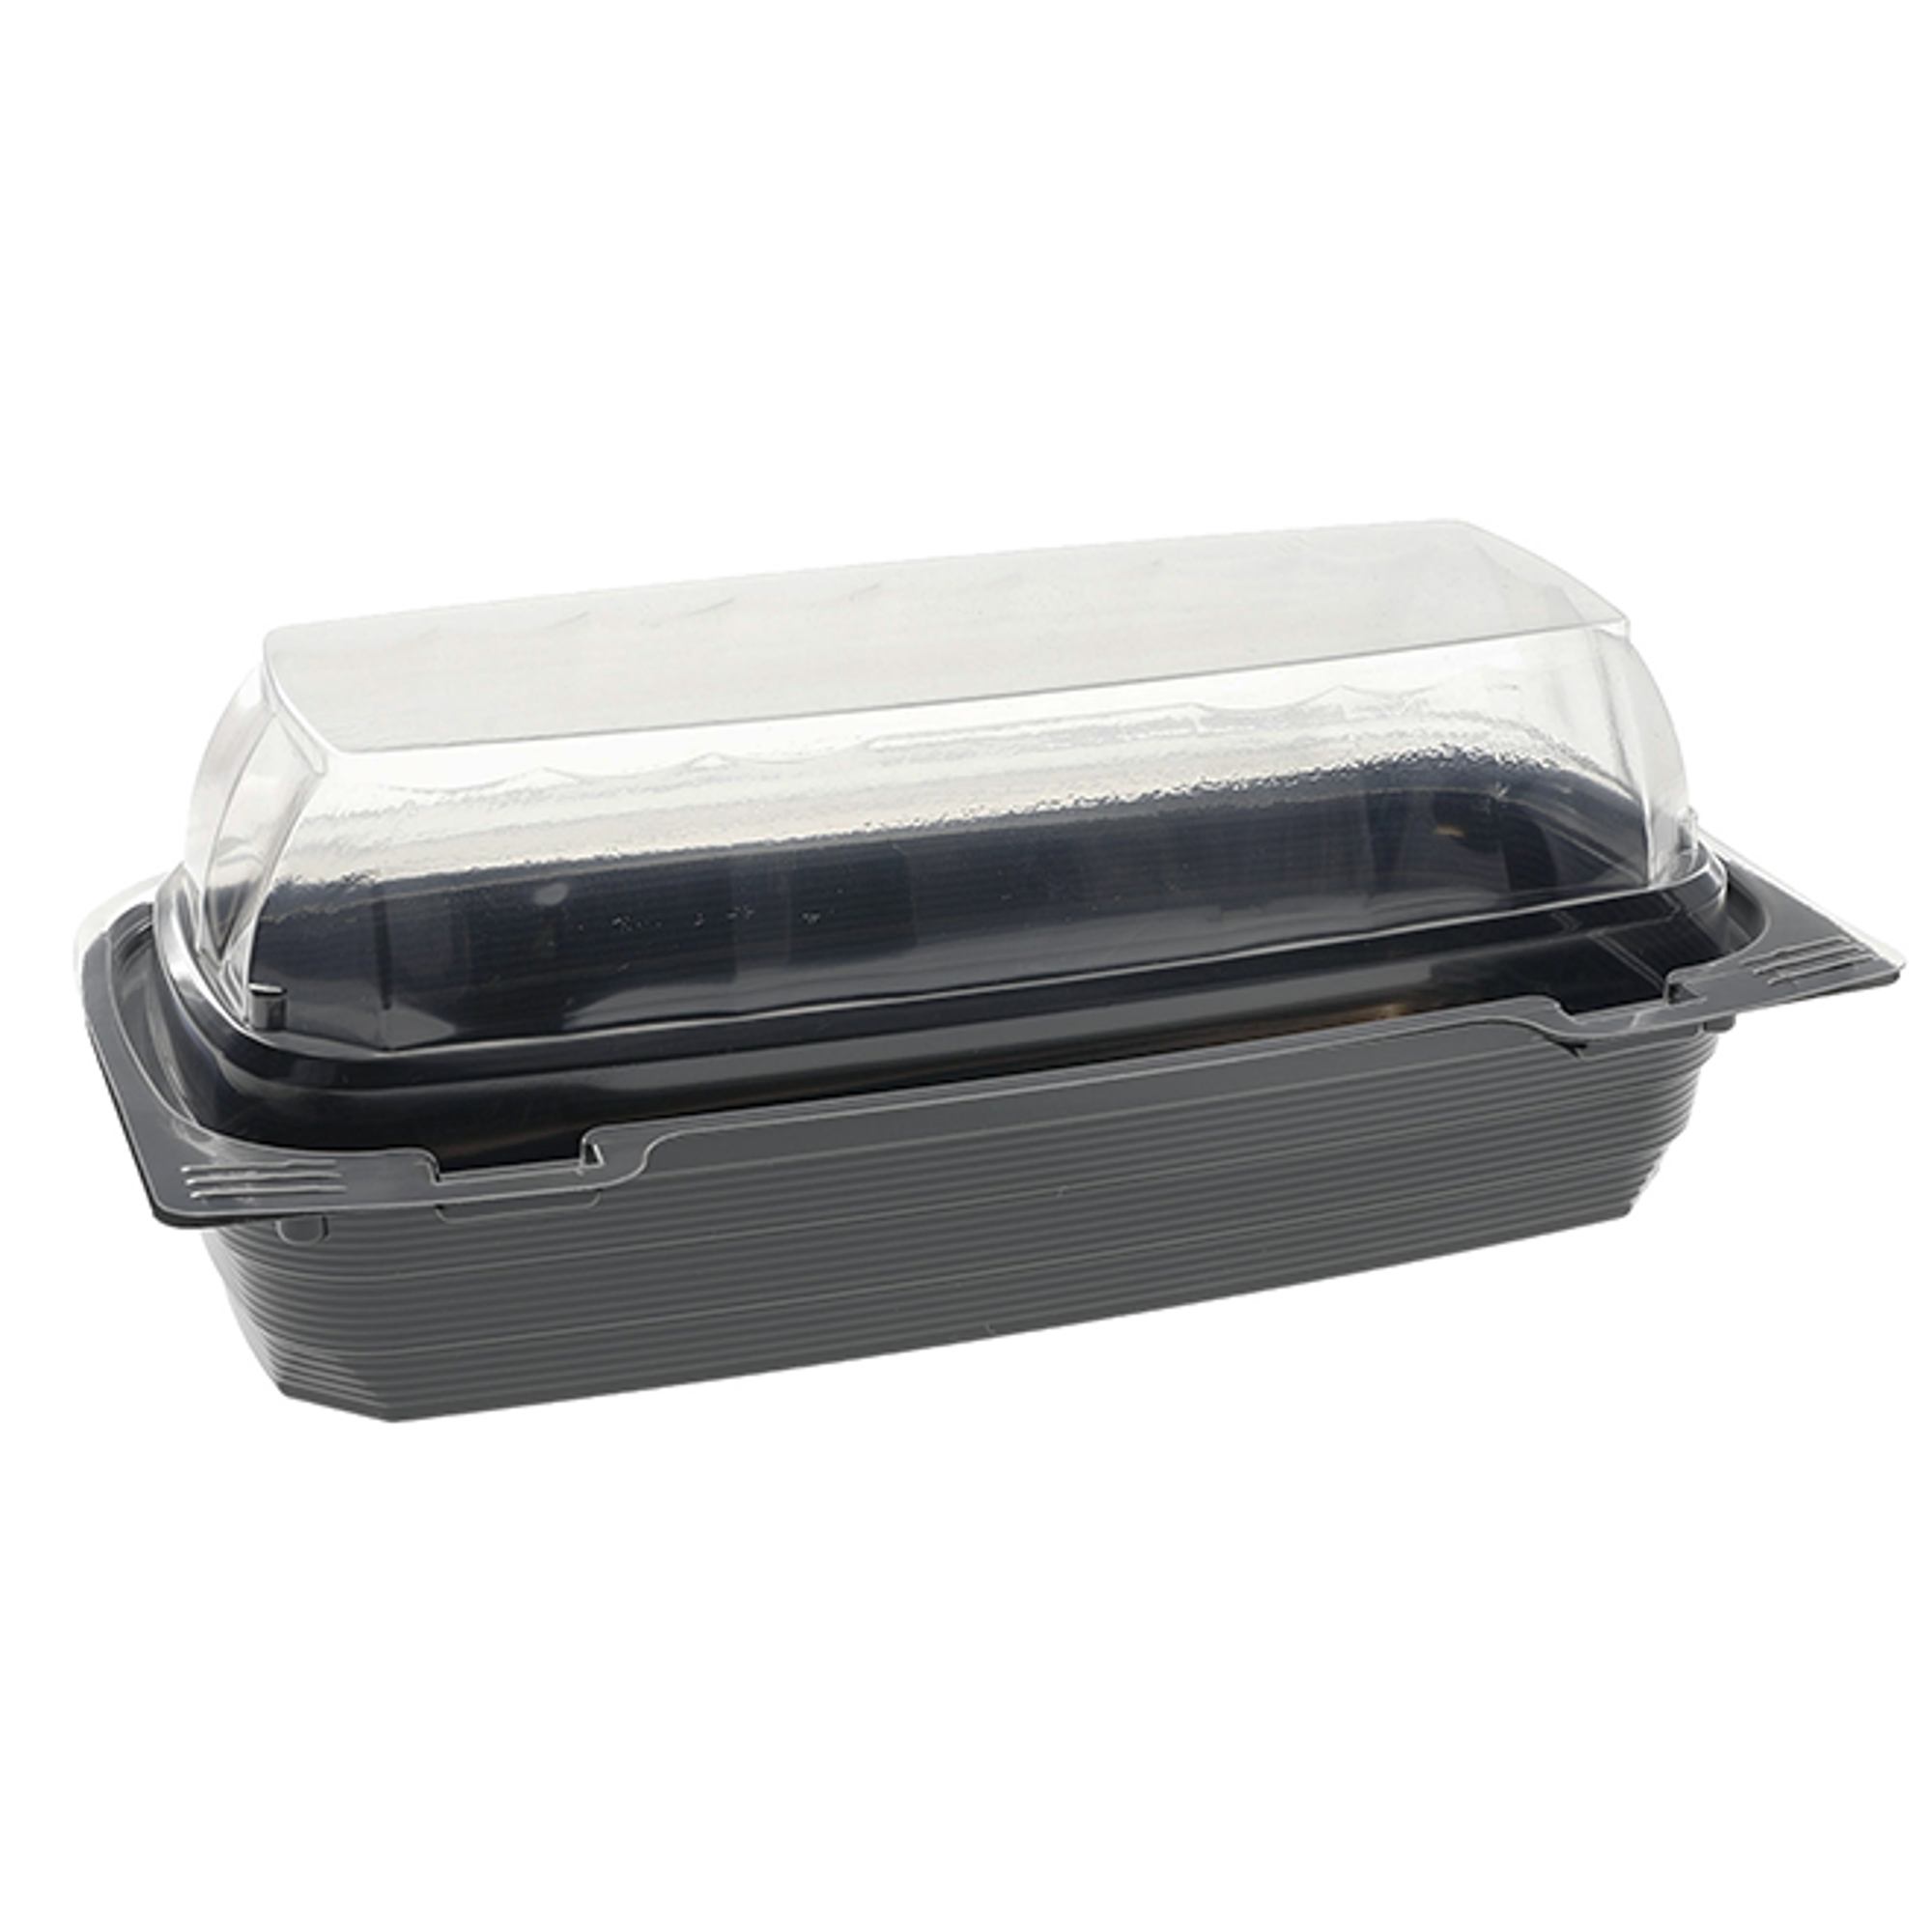 Crystal Seal® reFresh® 2-Compartment Square Container